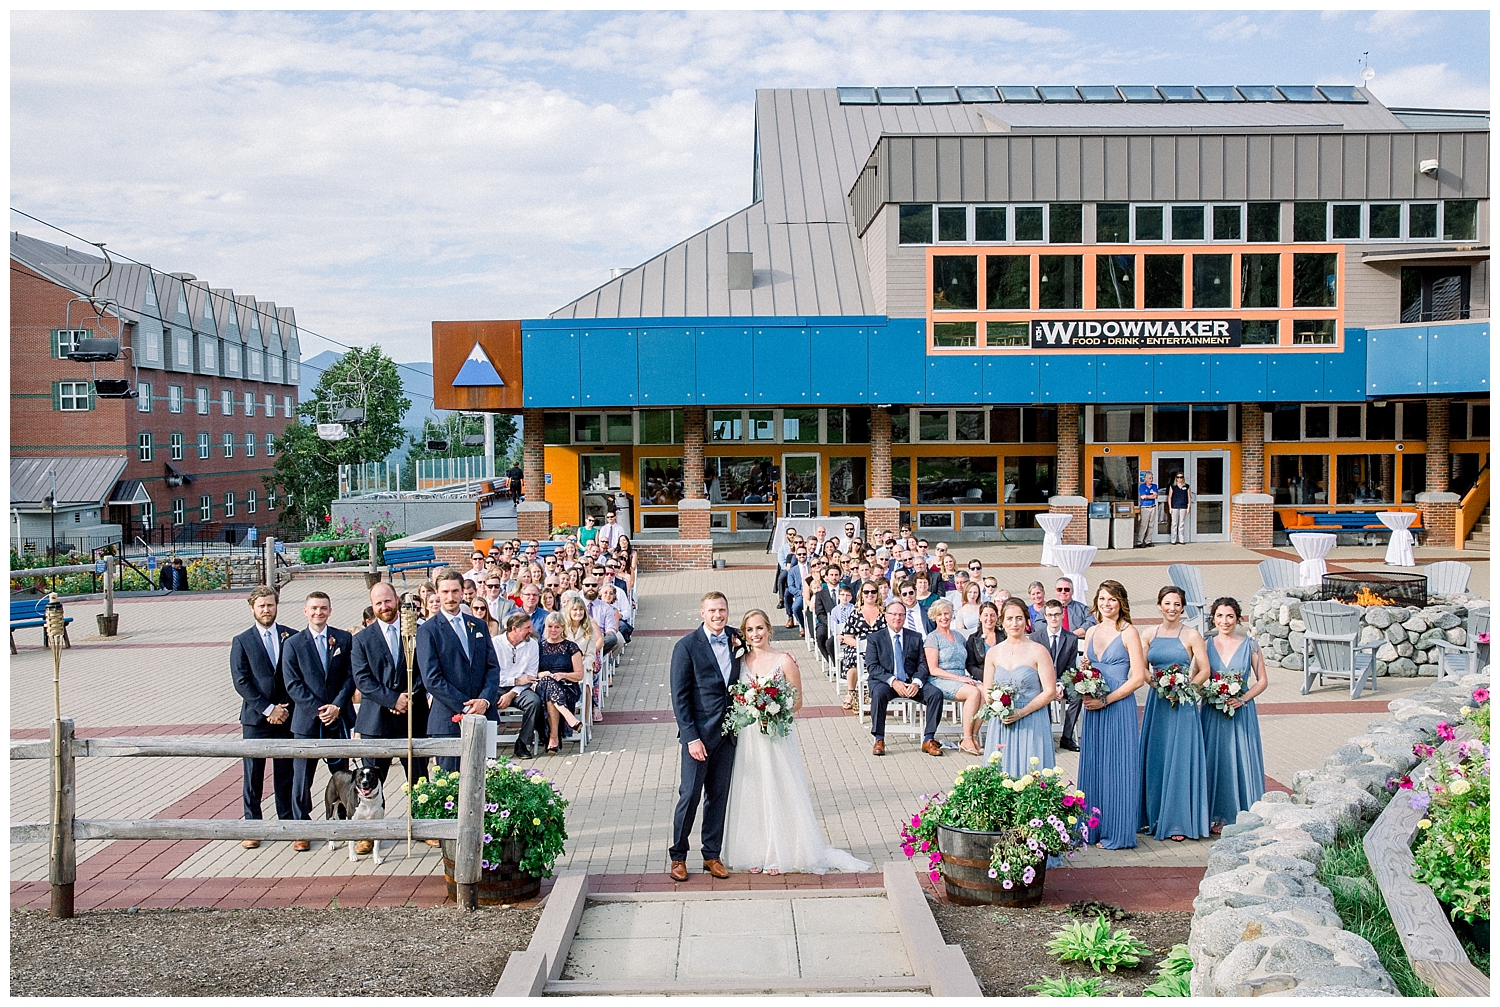 Group photo at outside wedding ceremony at Sugarloaf Mountain Resort in Maine, photos by Halie Olszowy.